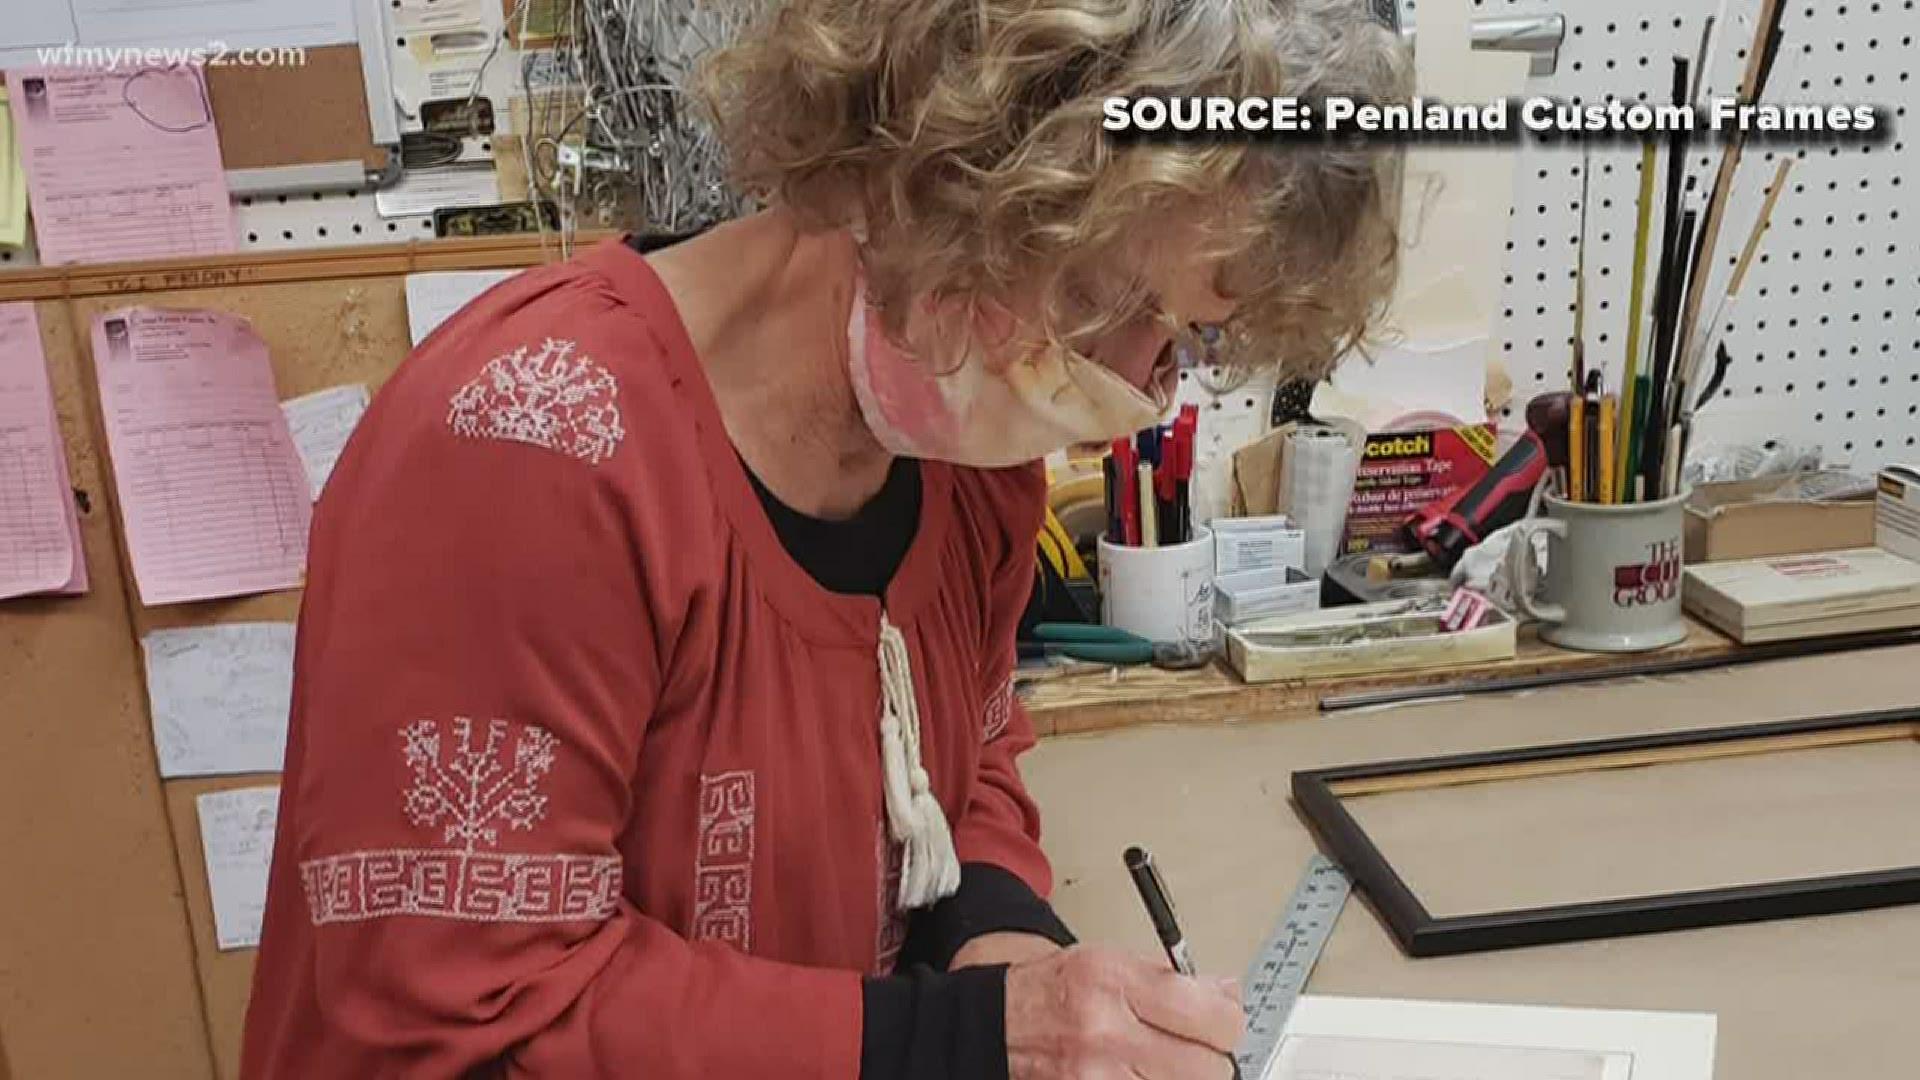 Running a small business successfully takes practice. Penland Custom Frames talks about business over the past few decades and how they’re maintaining success.